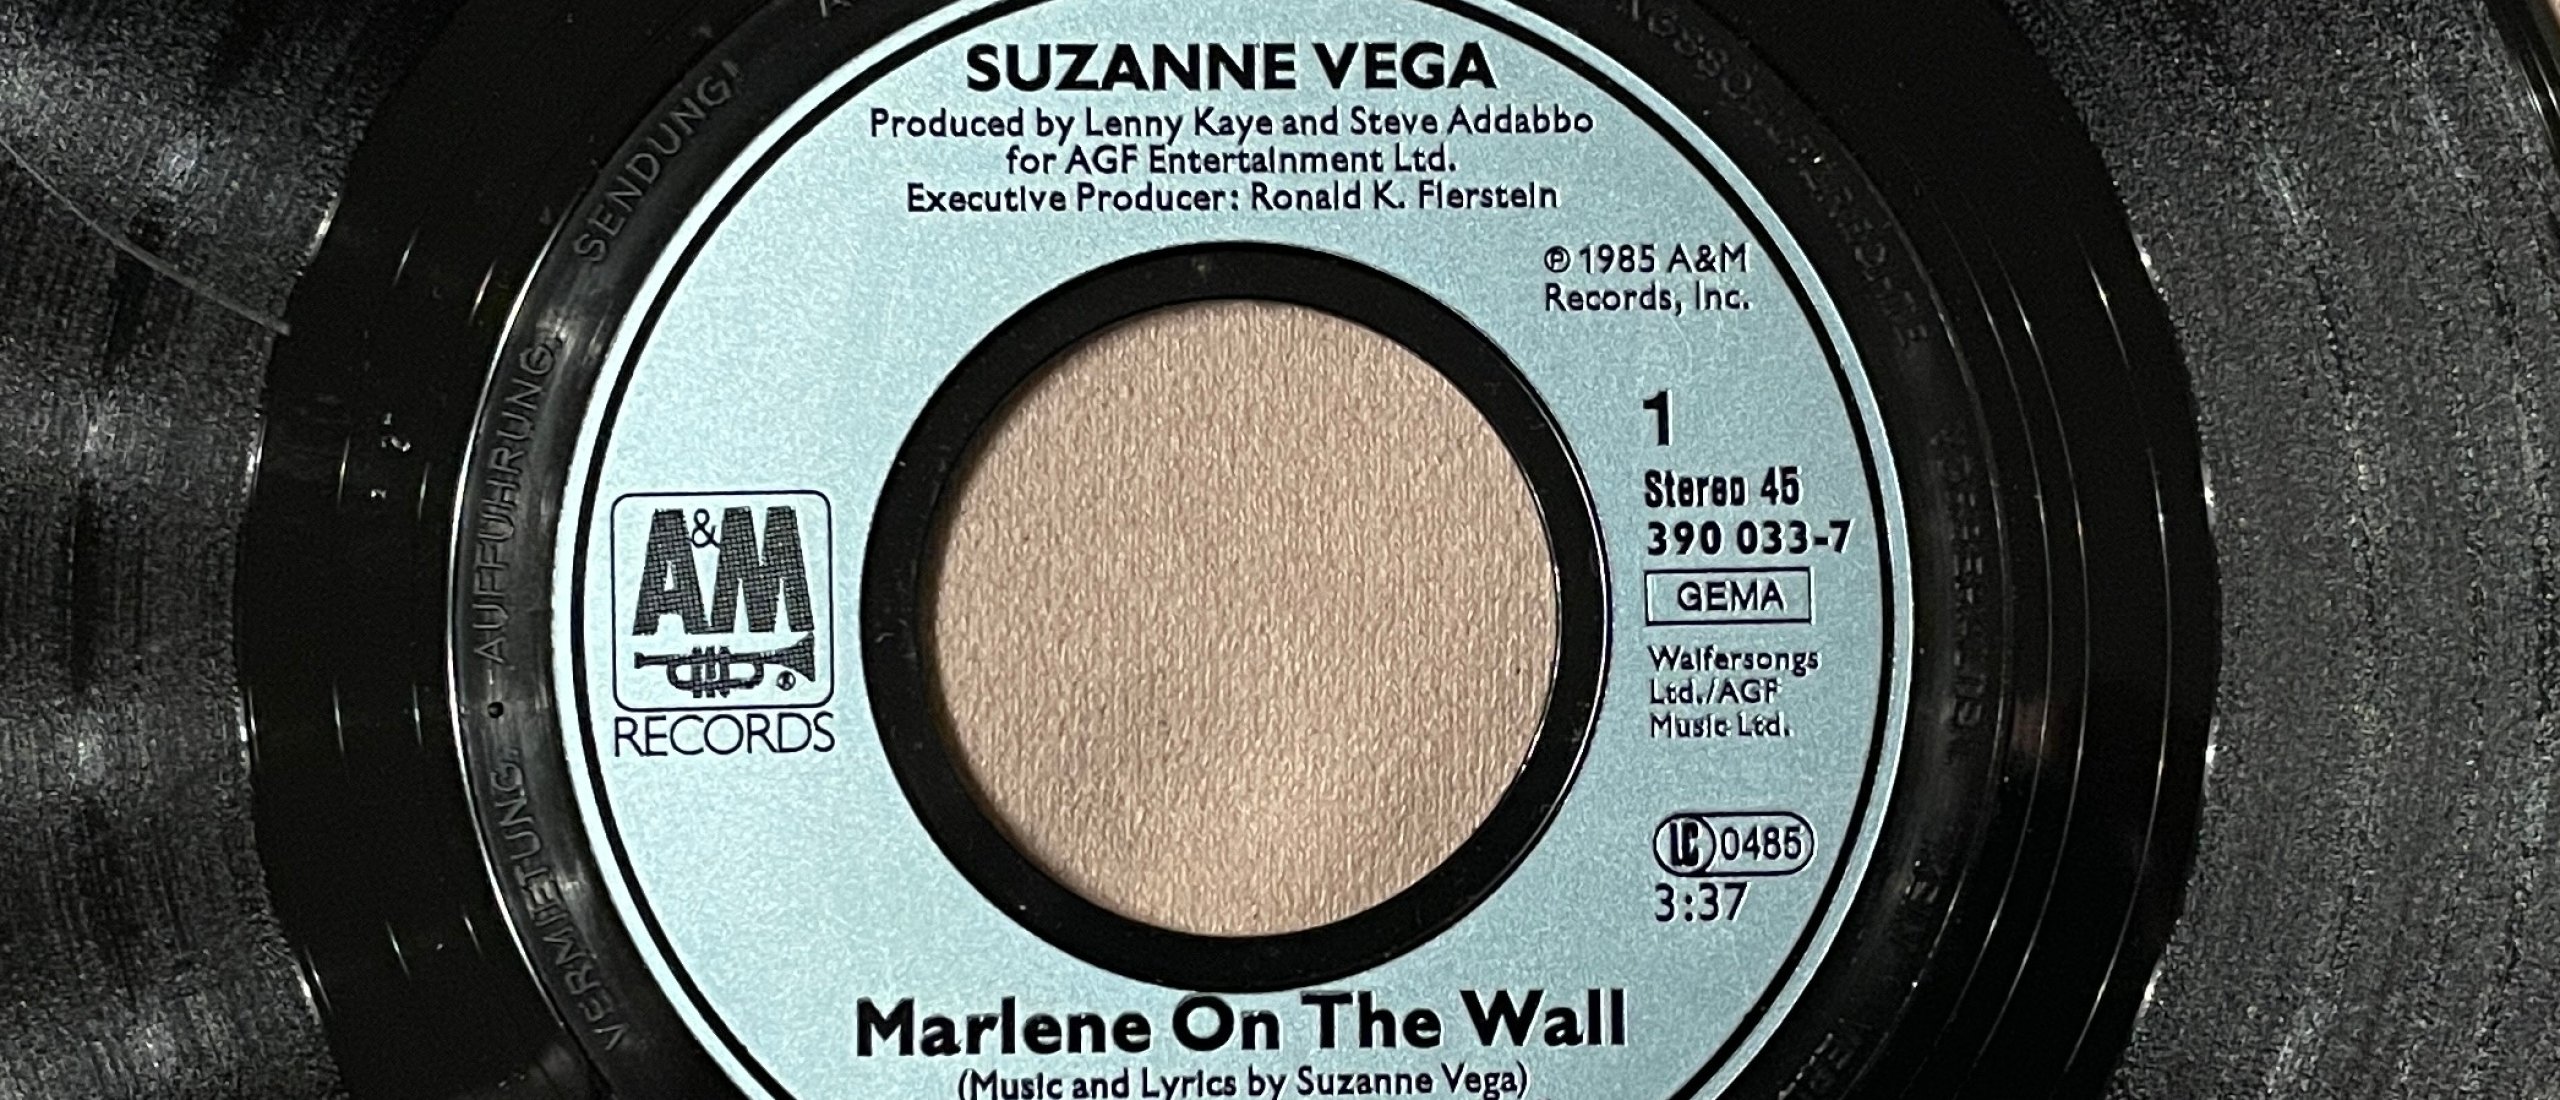 Forgotten Song Friday Suzanne Vega met Marlene On The Wall